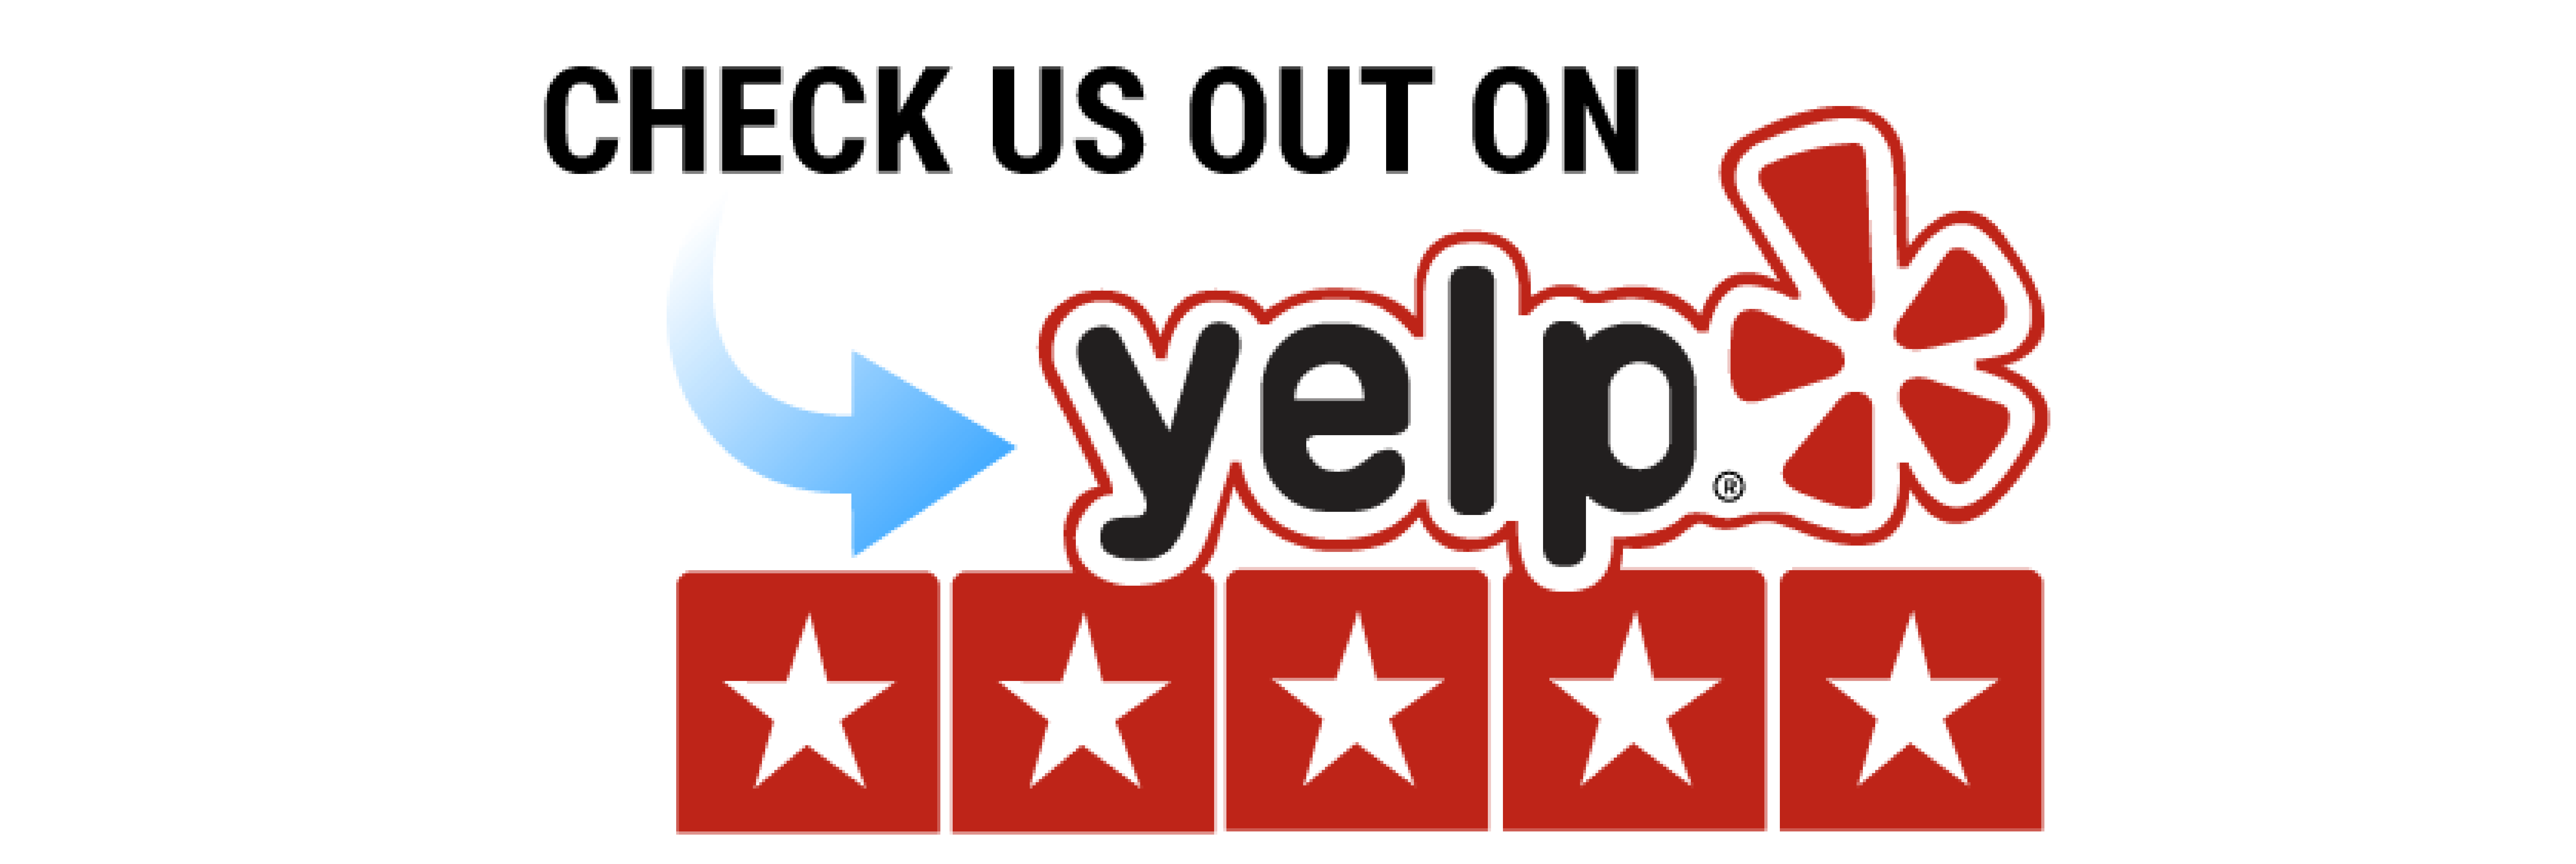 Check Us Out On Yelp Logo - TAADAS – Our Programs and Services